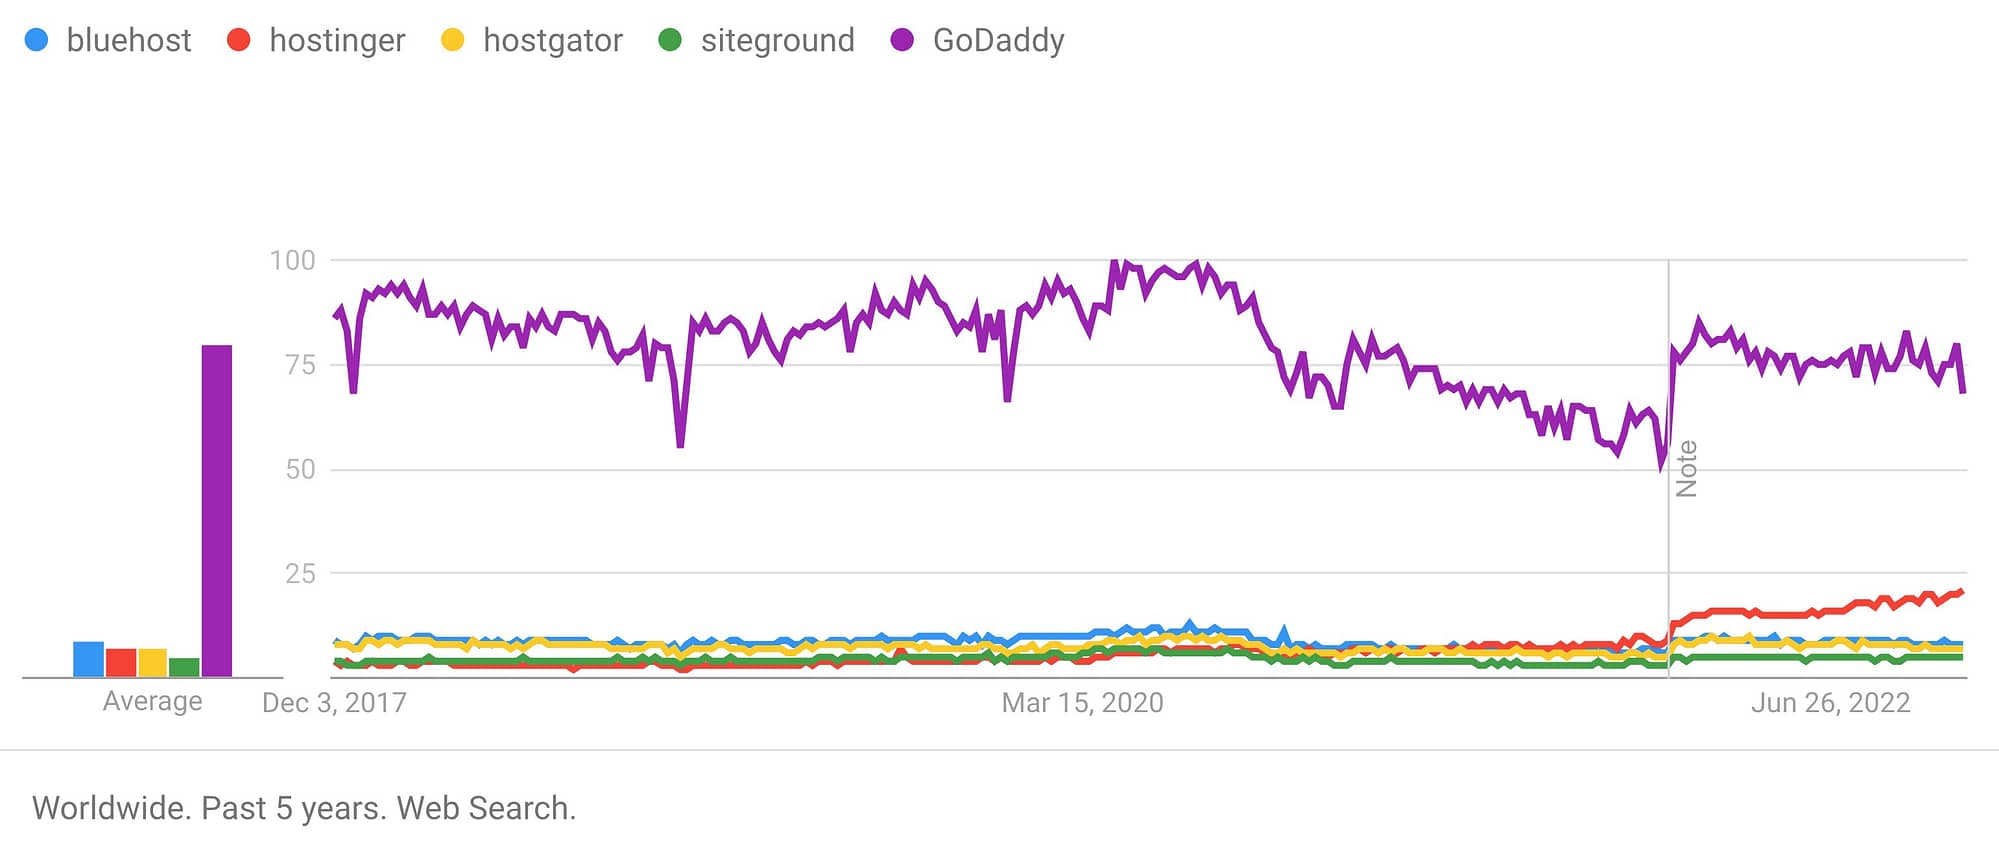 Google Trends with GoDaddy included